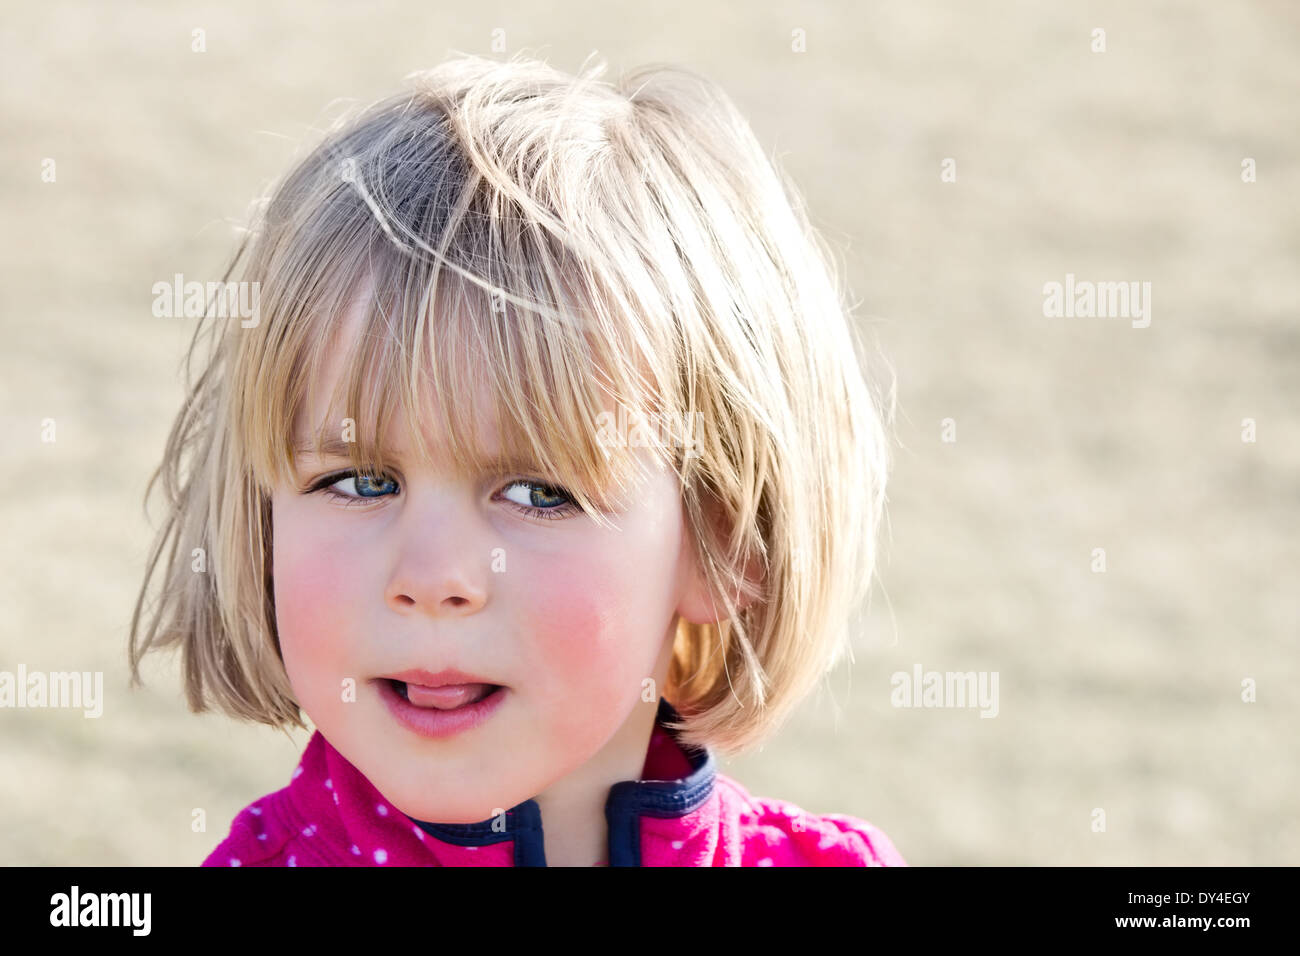 Little girl with wary look and tongue sticking out Stock Photo